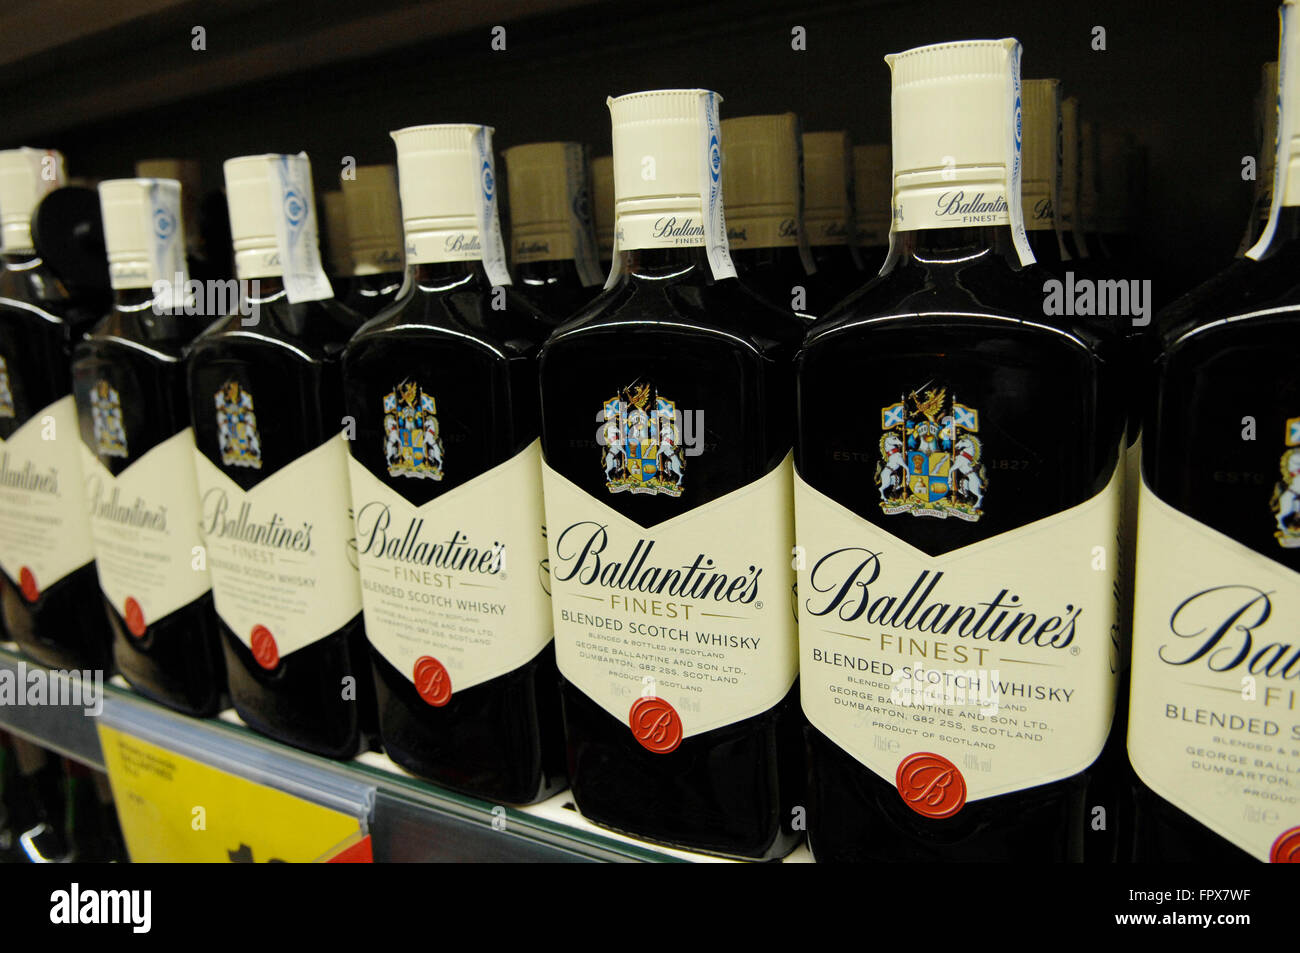 Ballantine's blended Scotch Whisky produced by Pernod Ricard in Dumbarton, Scotland,displayed on a shelve in a supermarket. Stock Photo